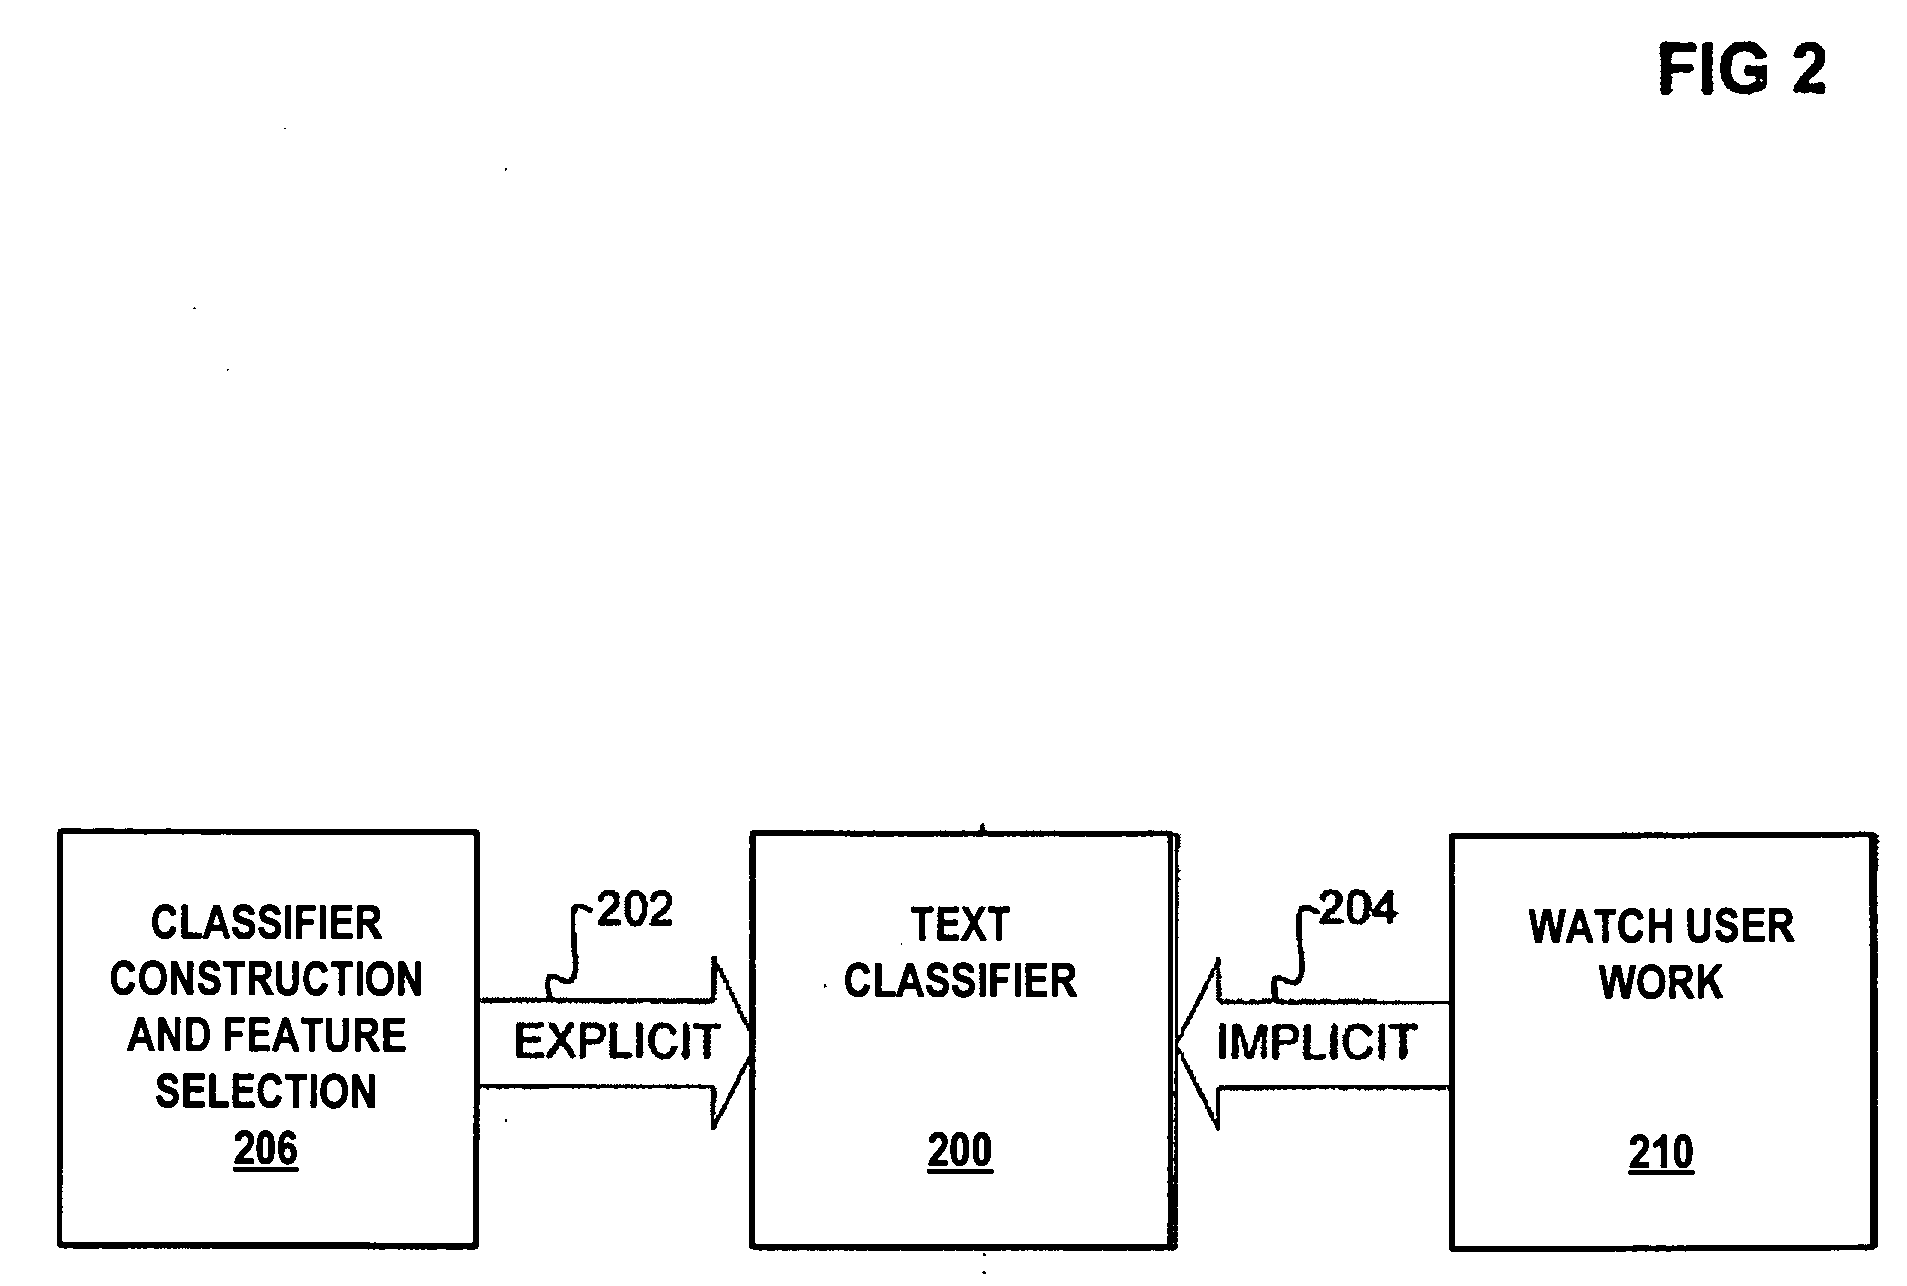 Integration of a computer-based message priority system with mobile electronic devices